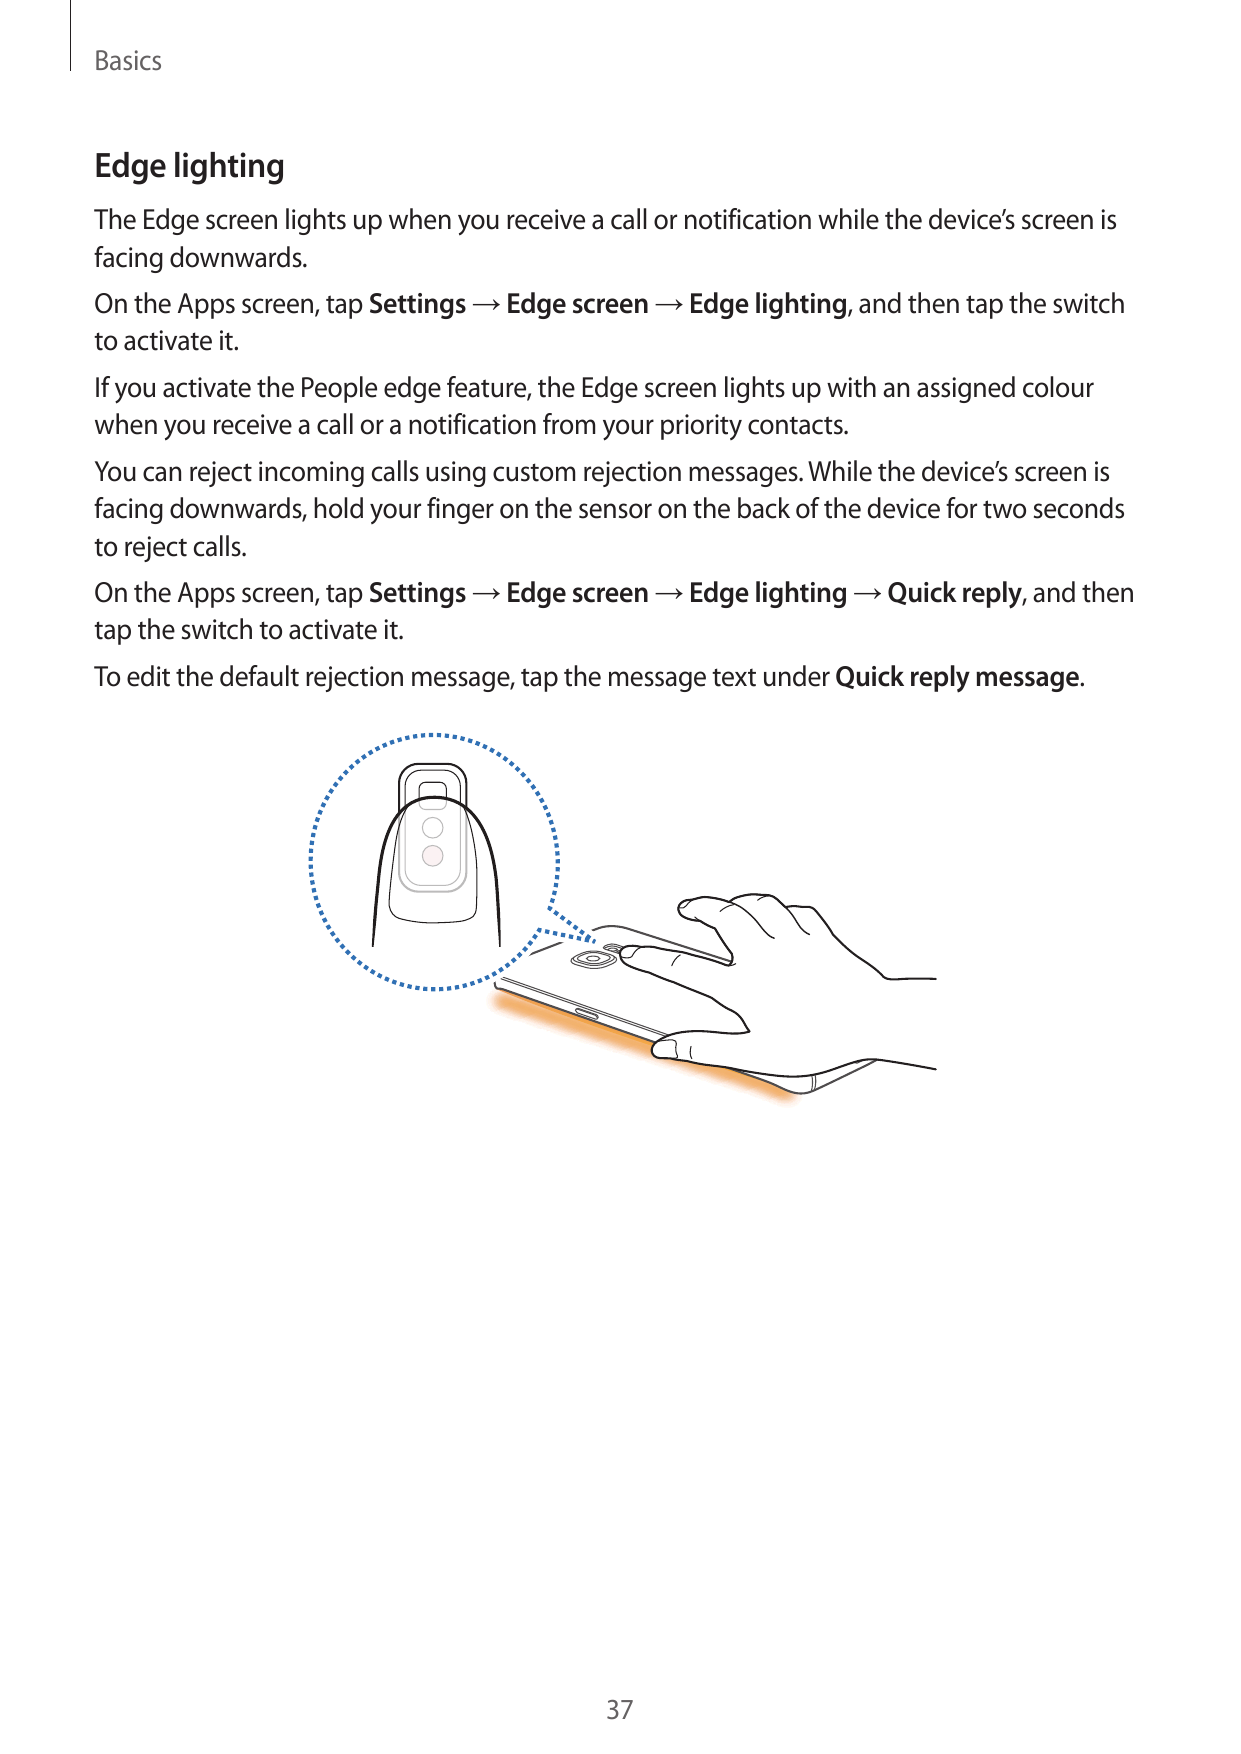 BasicsEdge lightingThe Edge screen lights up when you receive a call or notification while the device’s screen isfacing downward